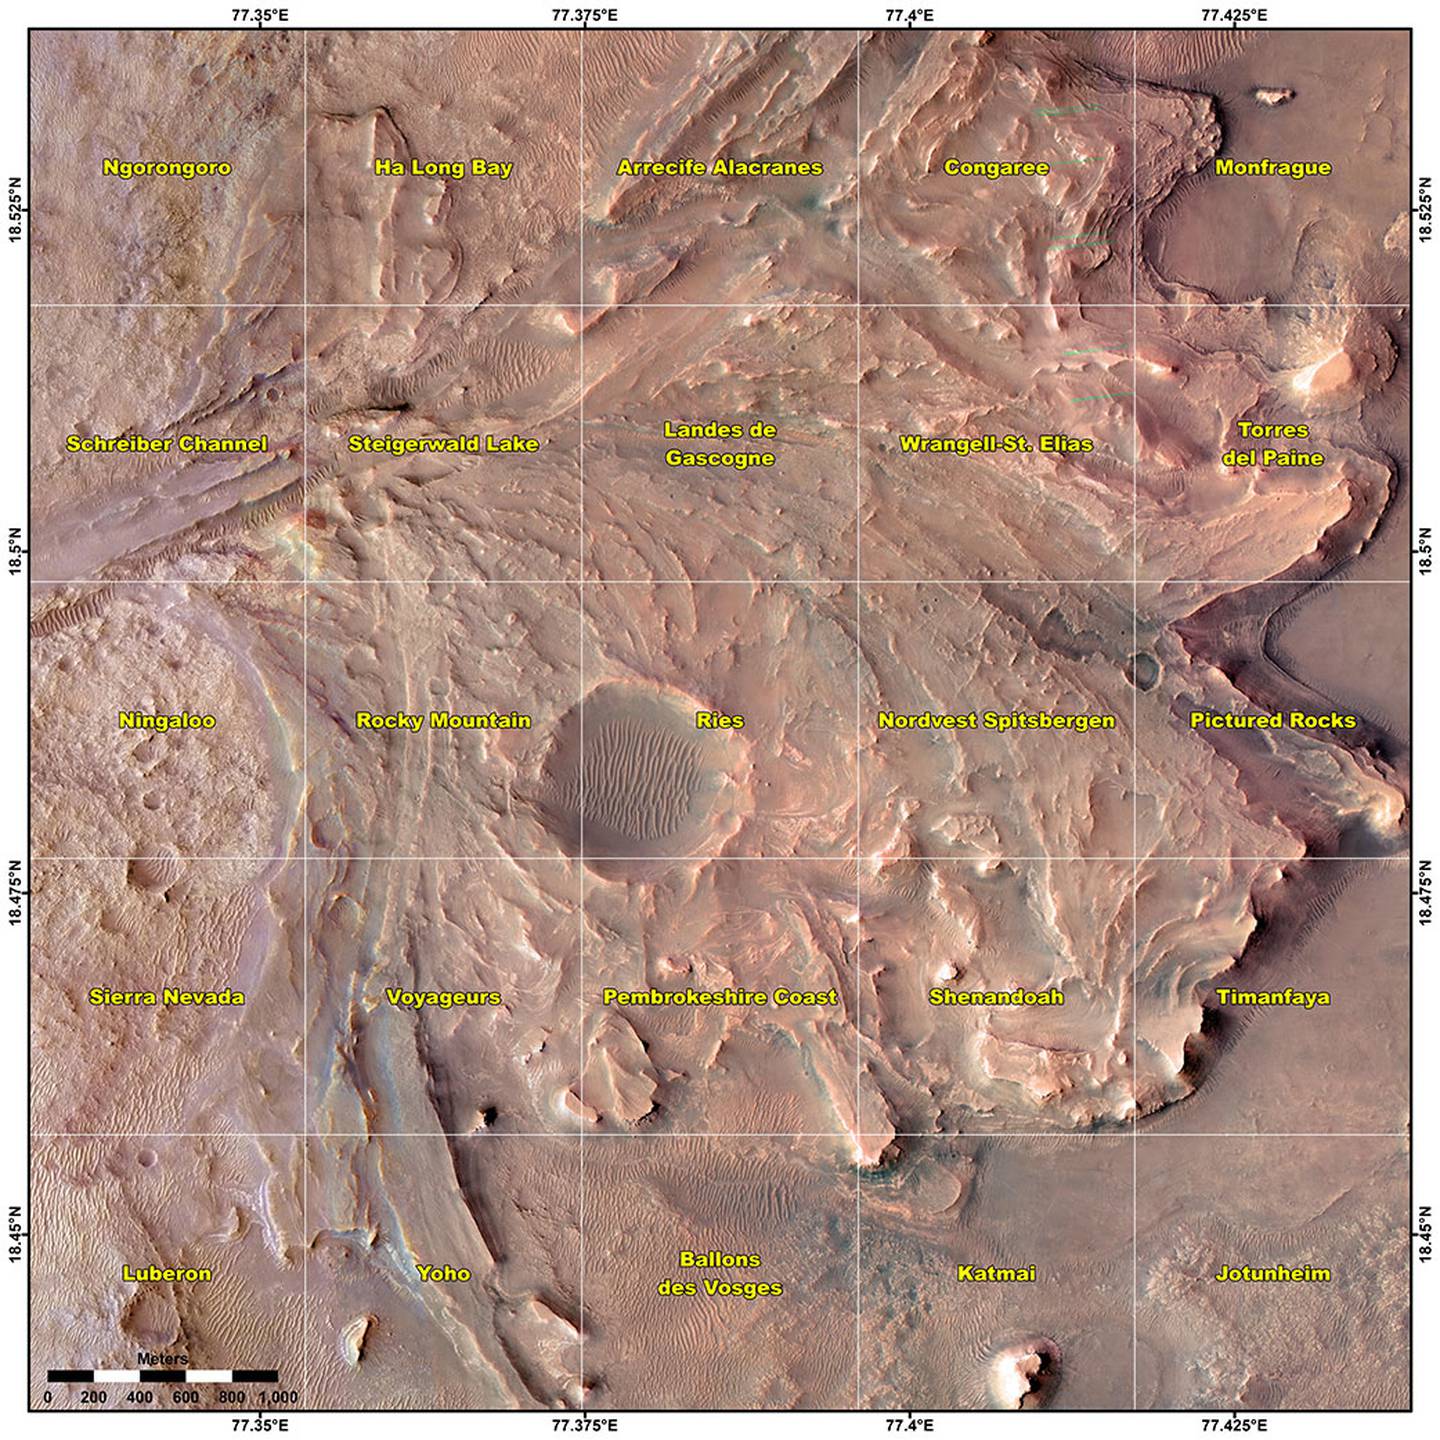 How and why does NASA name each rock it explores on Mars?